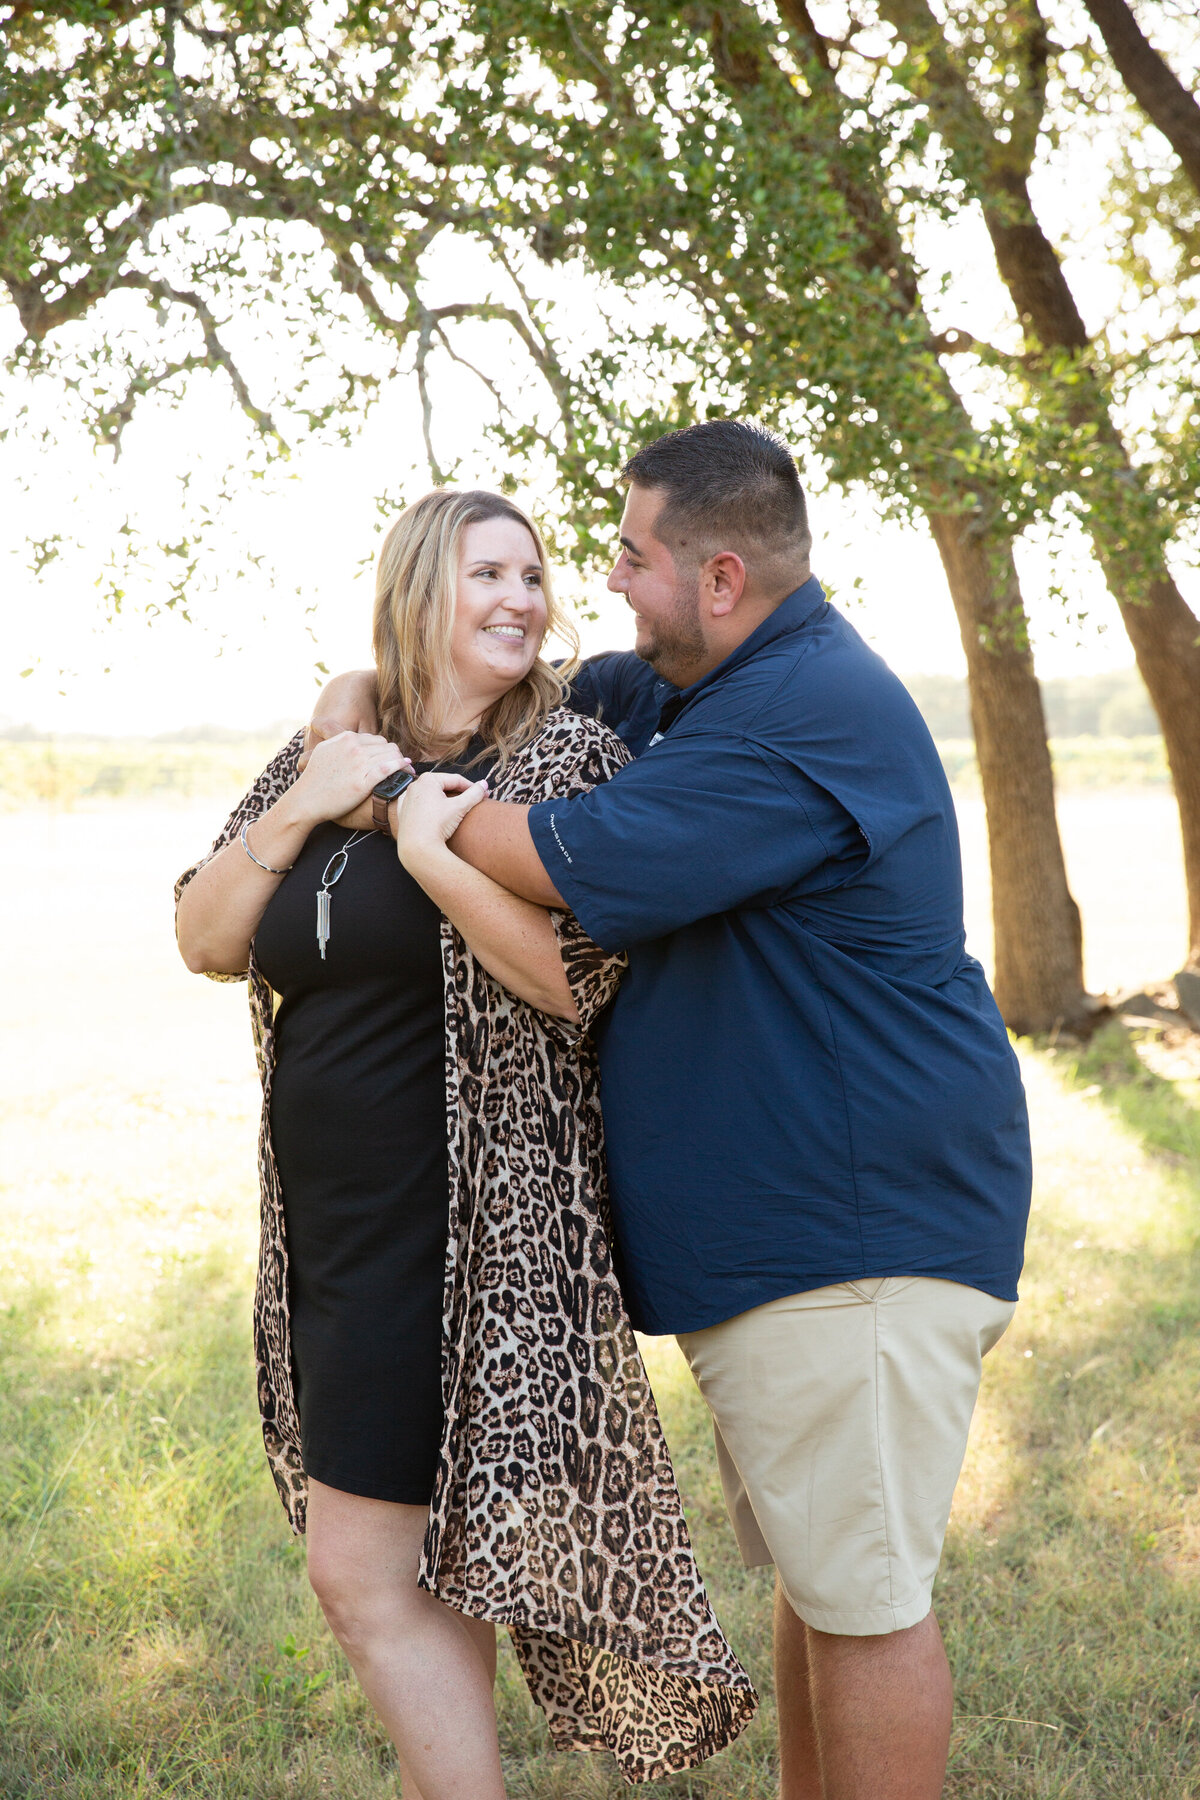 A couple hugging under a tree during their engagement session captured by an Austin wedding photographer.